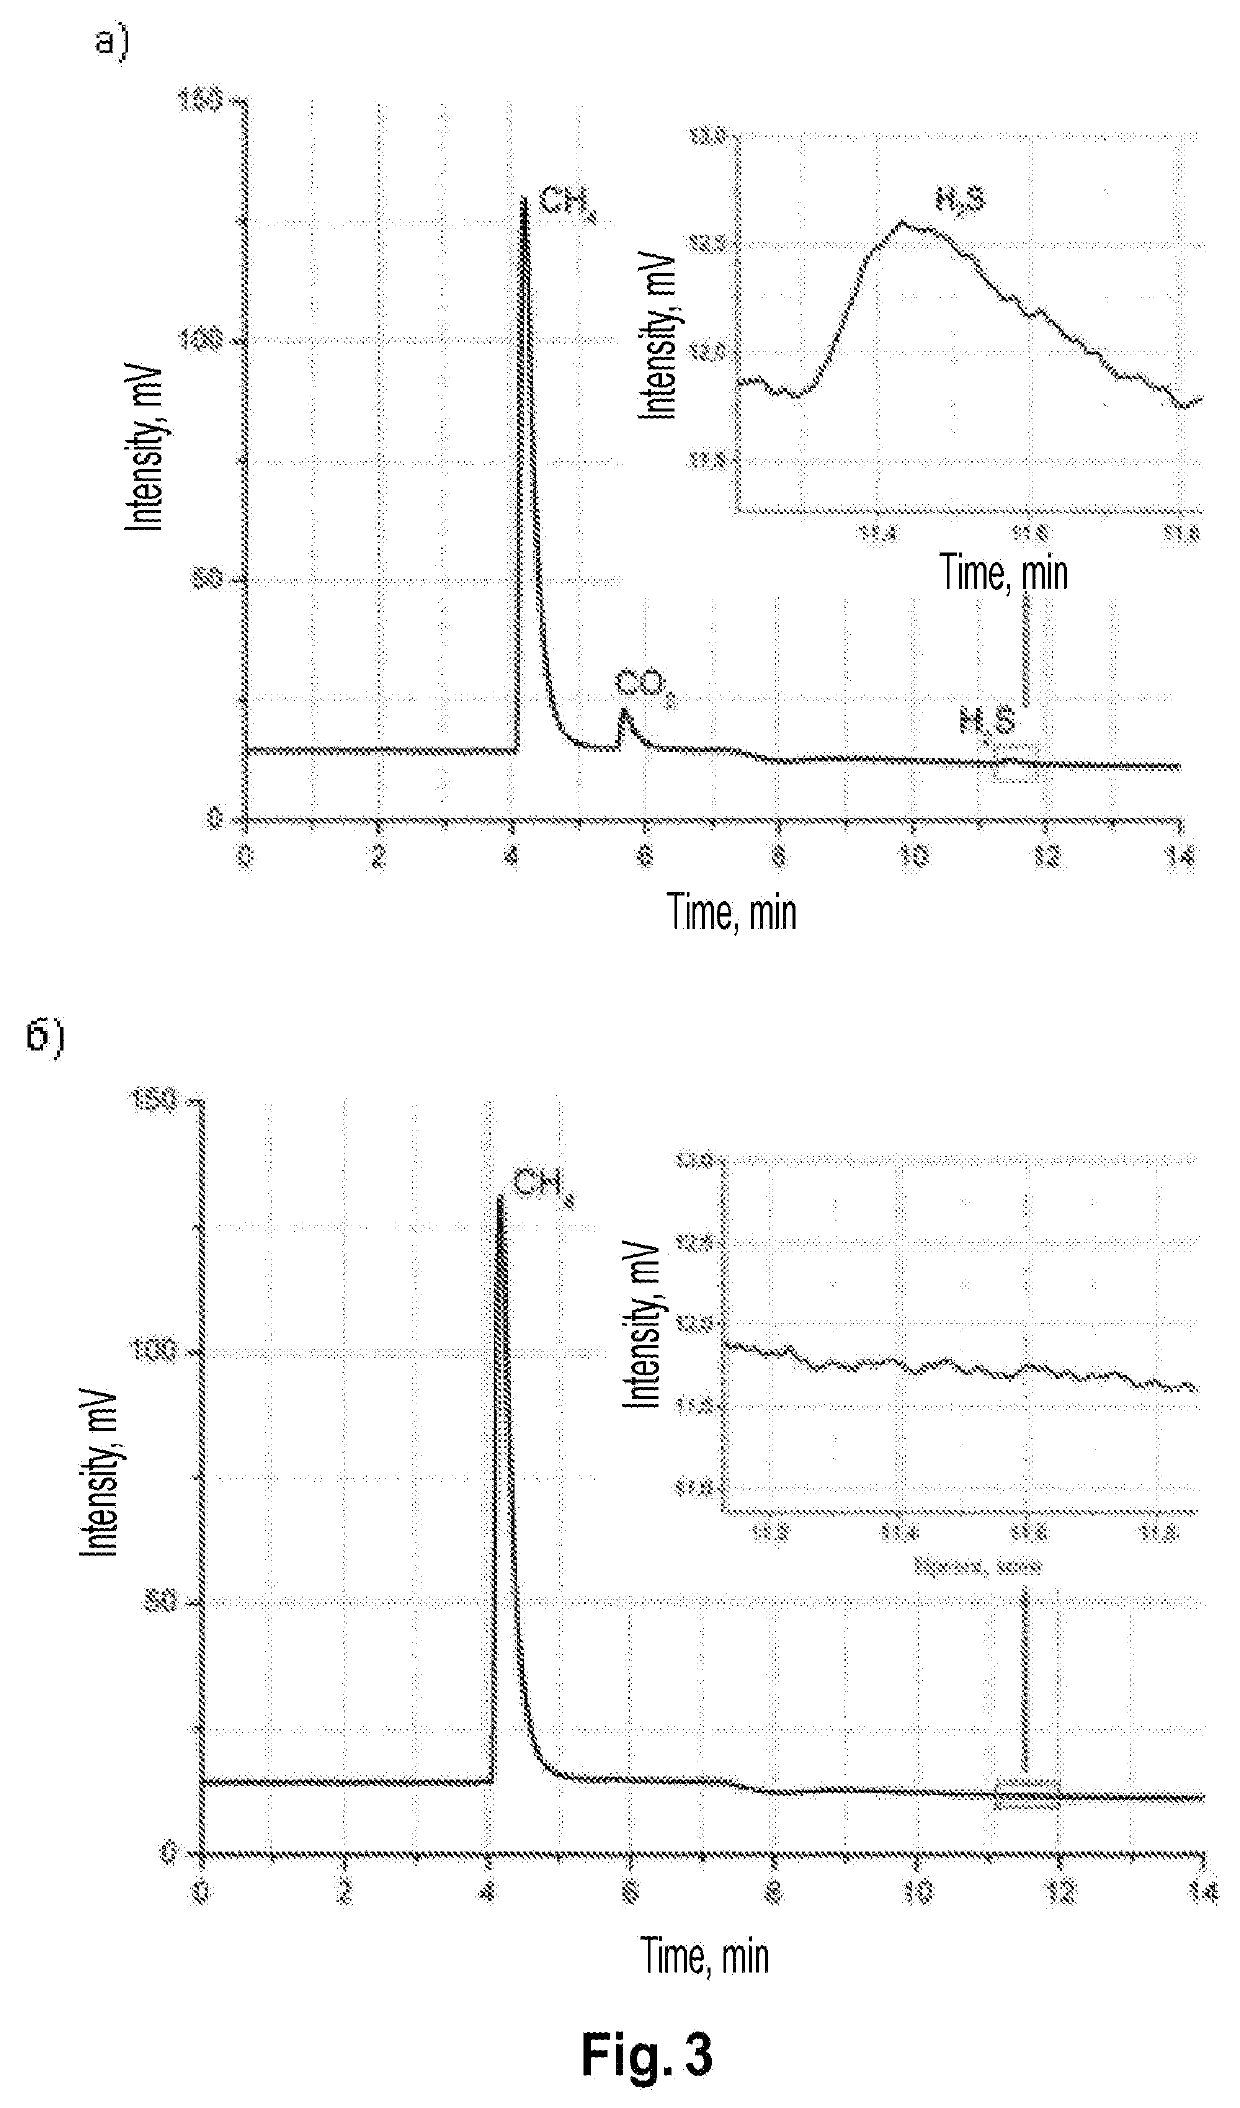 Method of extracting components of gas mixtures by pertraction on nanoporous membranes